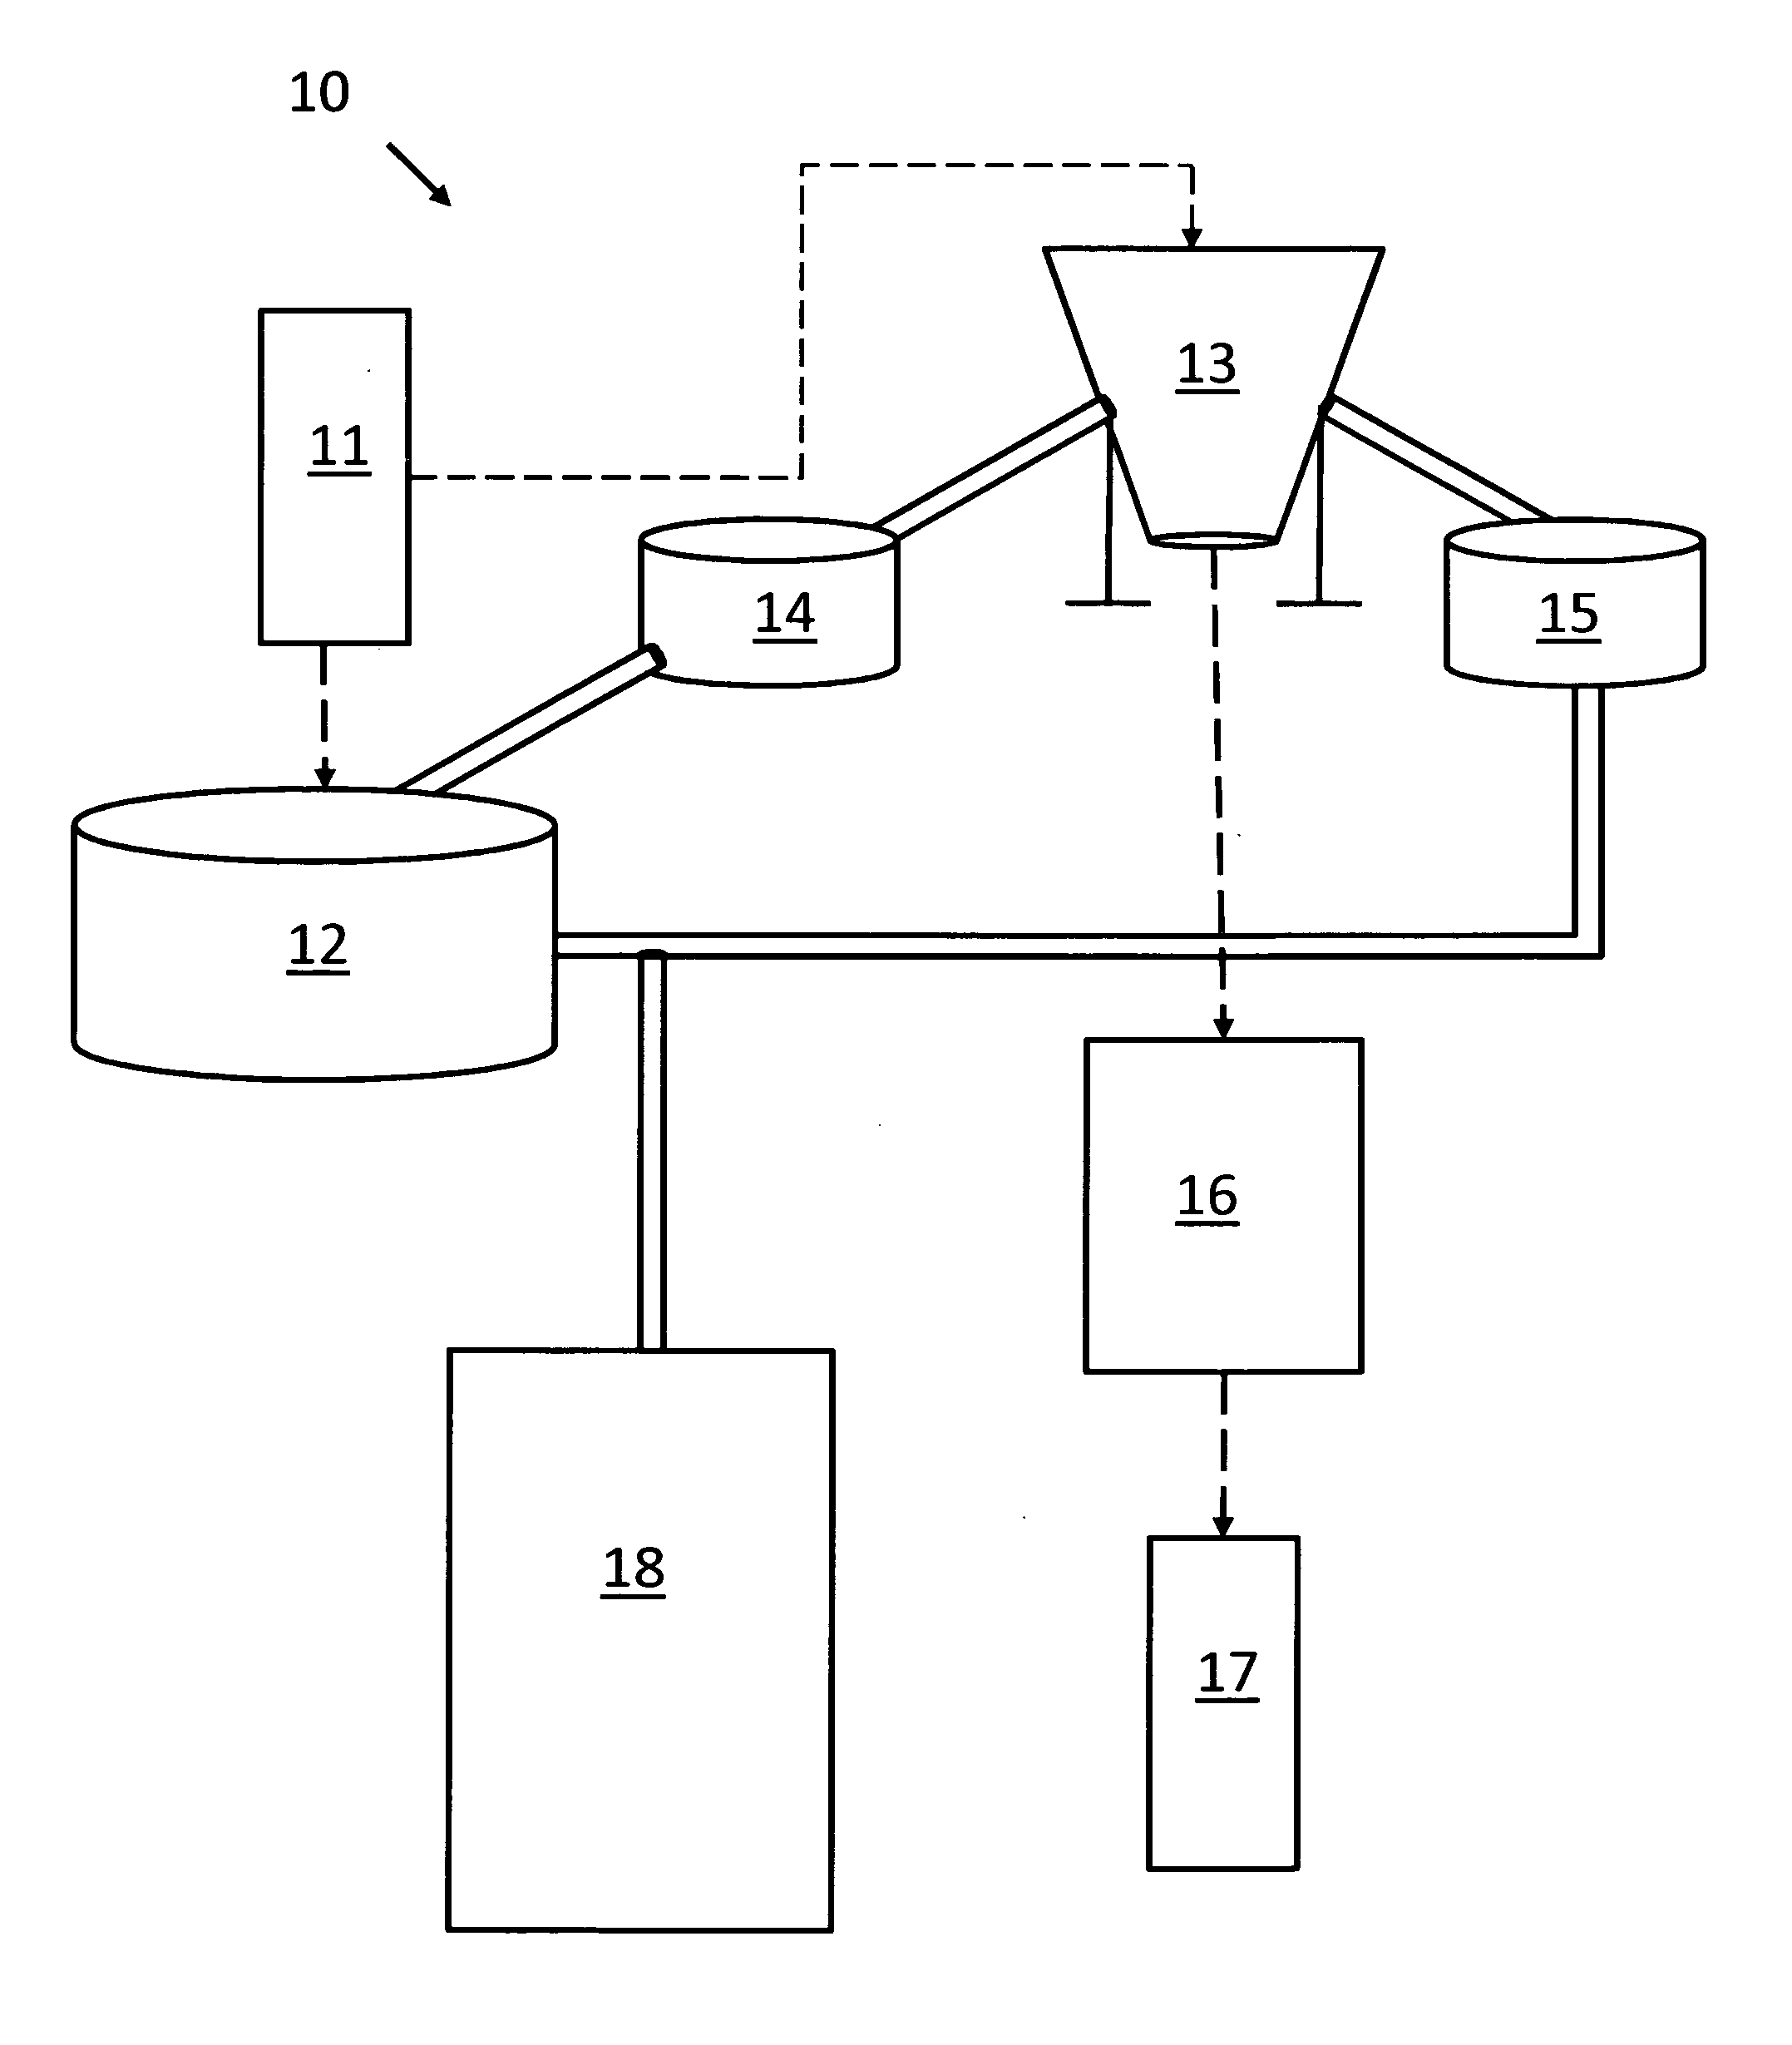 System and method for reprocessing animal bedding